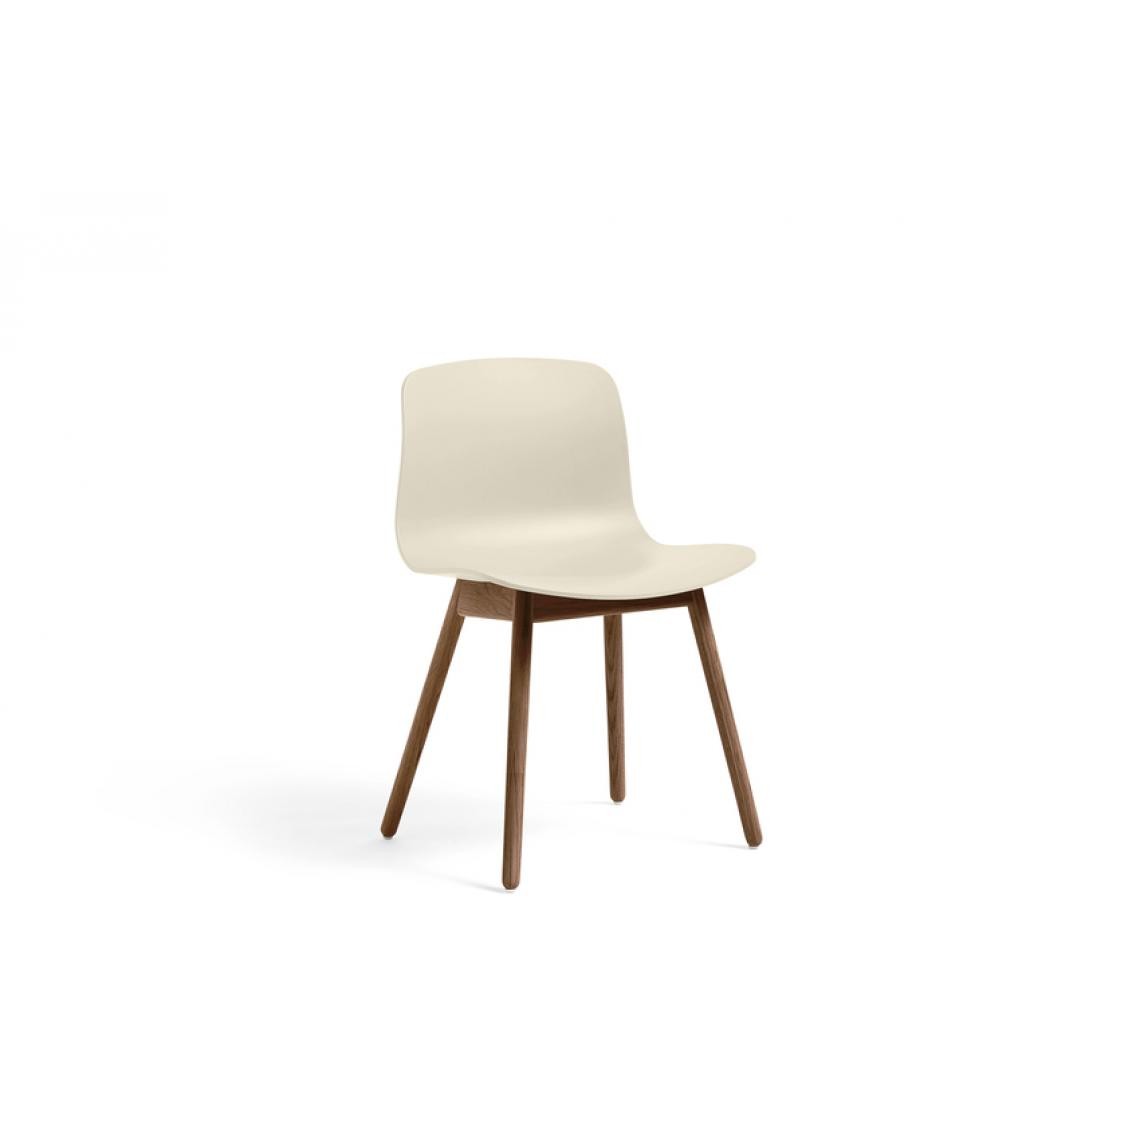 Hay - About A Chair AAC 12 ECO noyer - blanc crème - Chaises